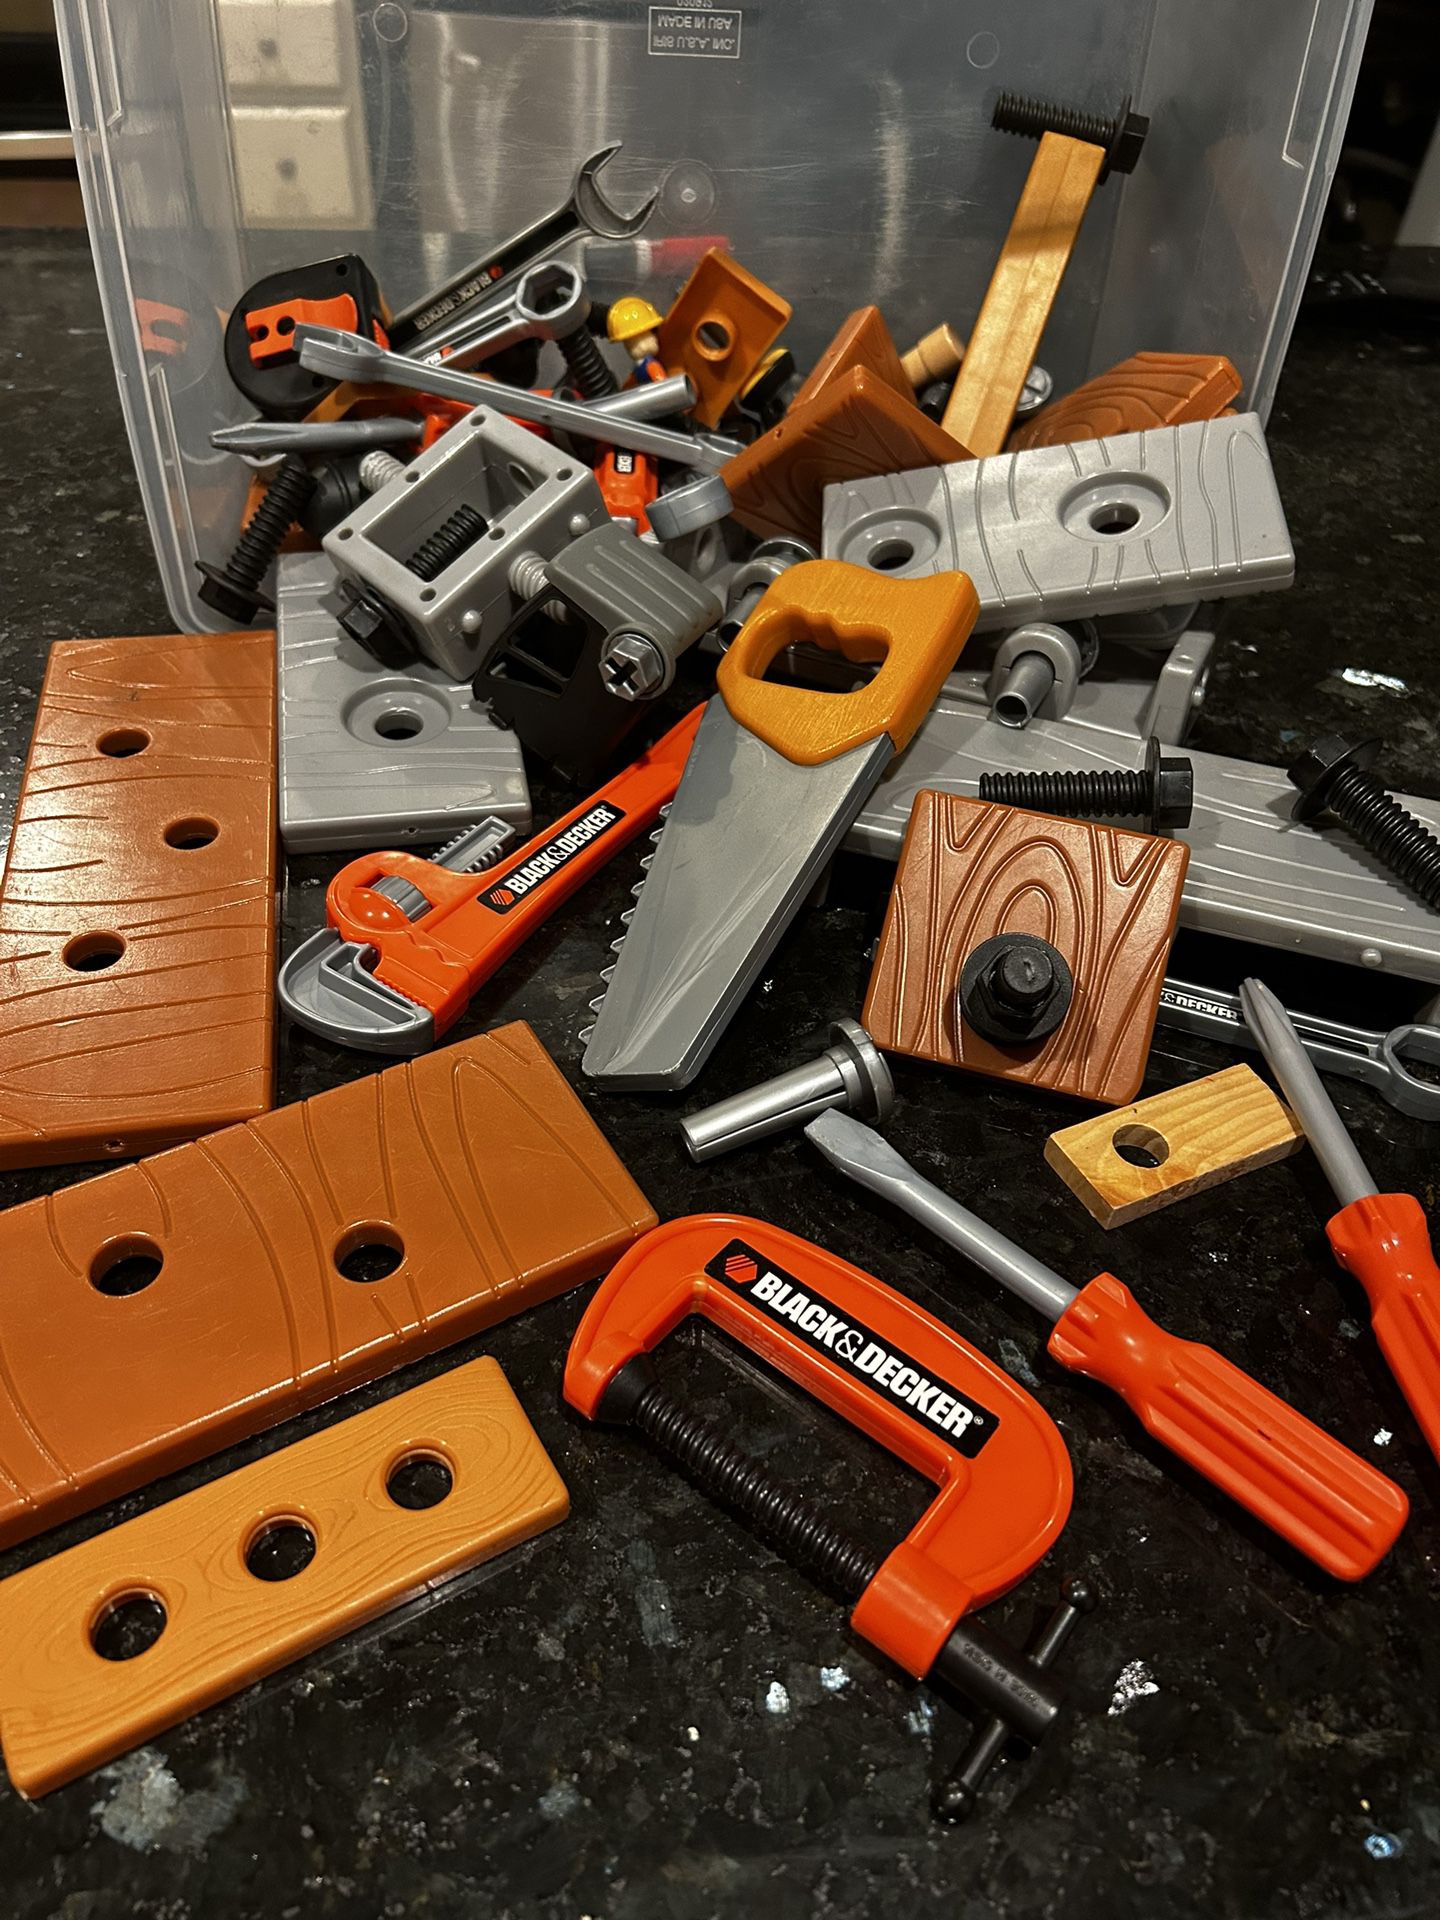 Black And Decker Toy Tool Set for Sale in Anaheim, CA - OfferUp